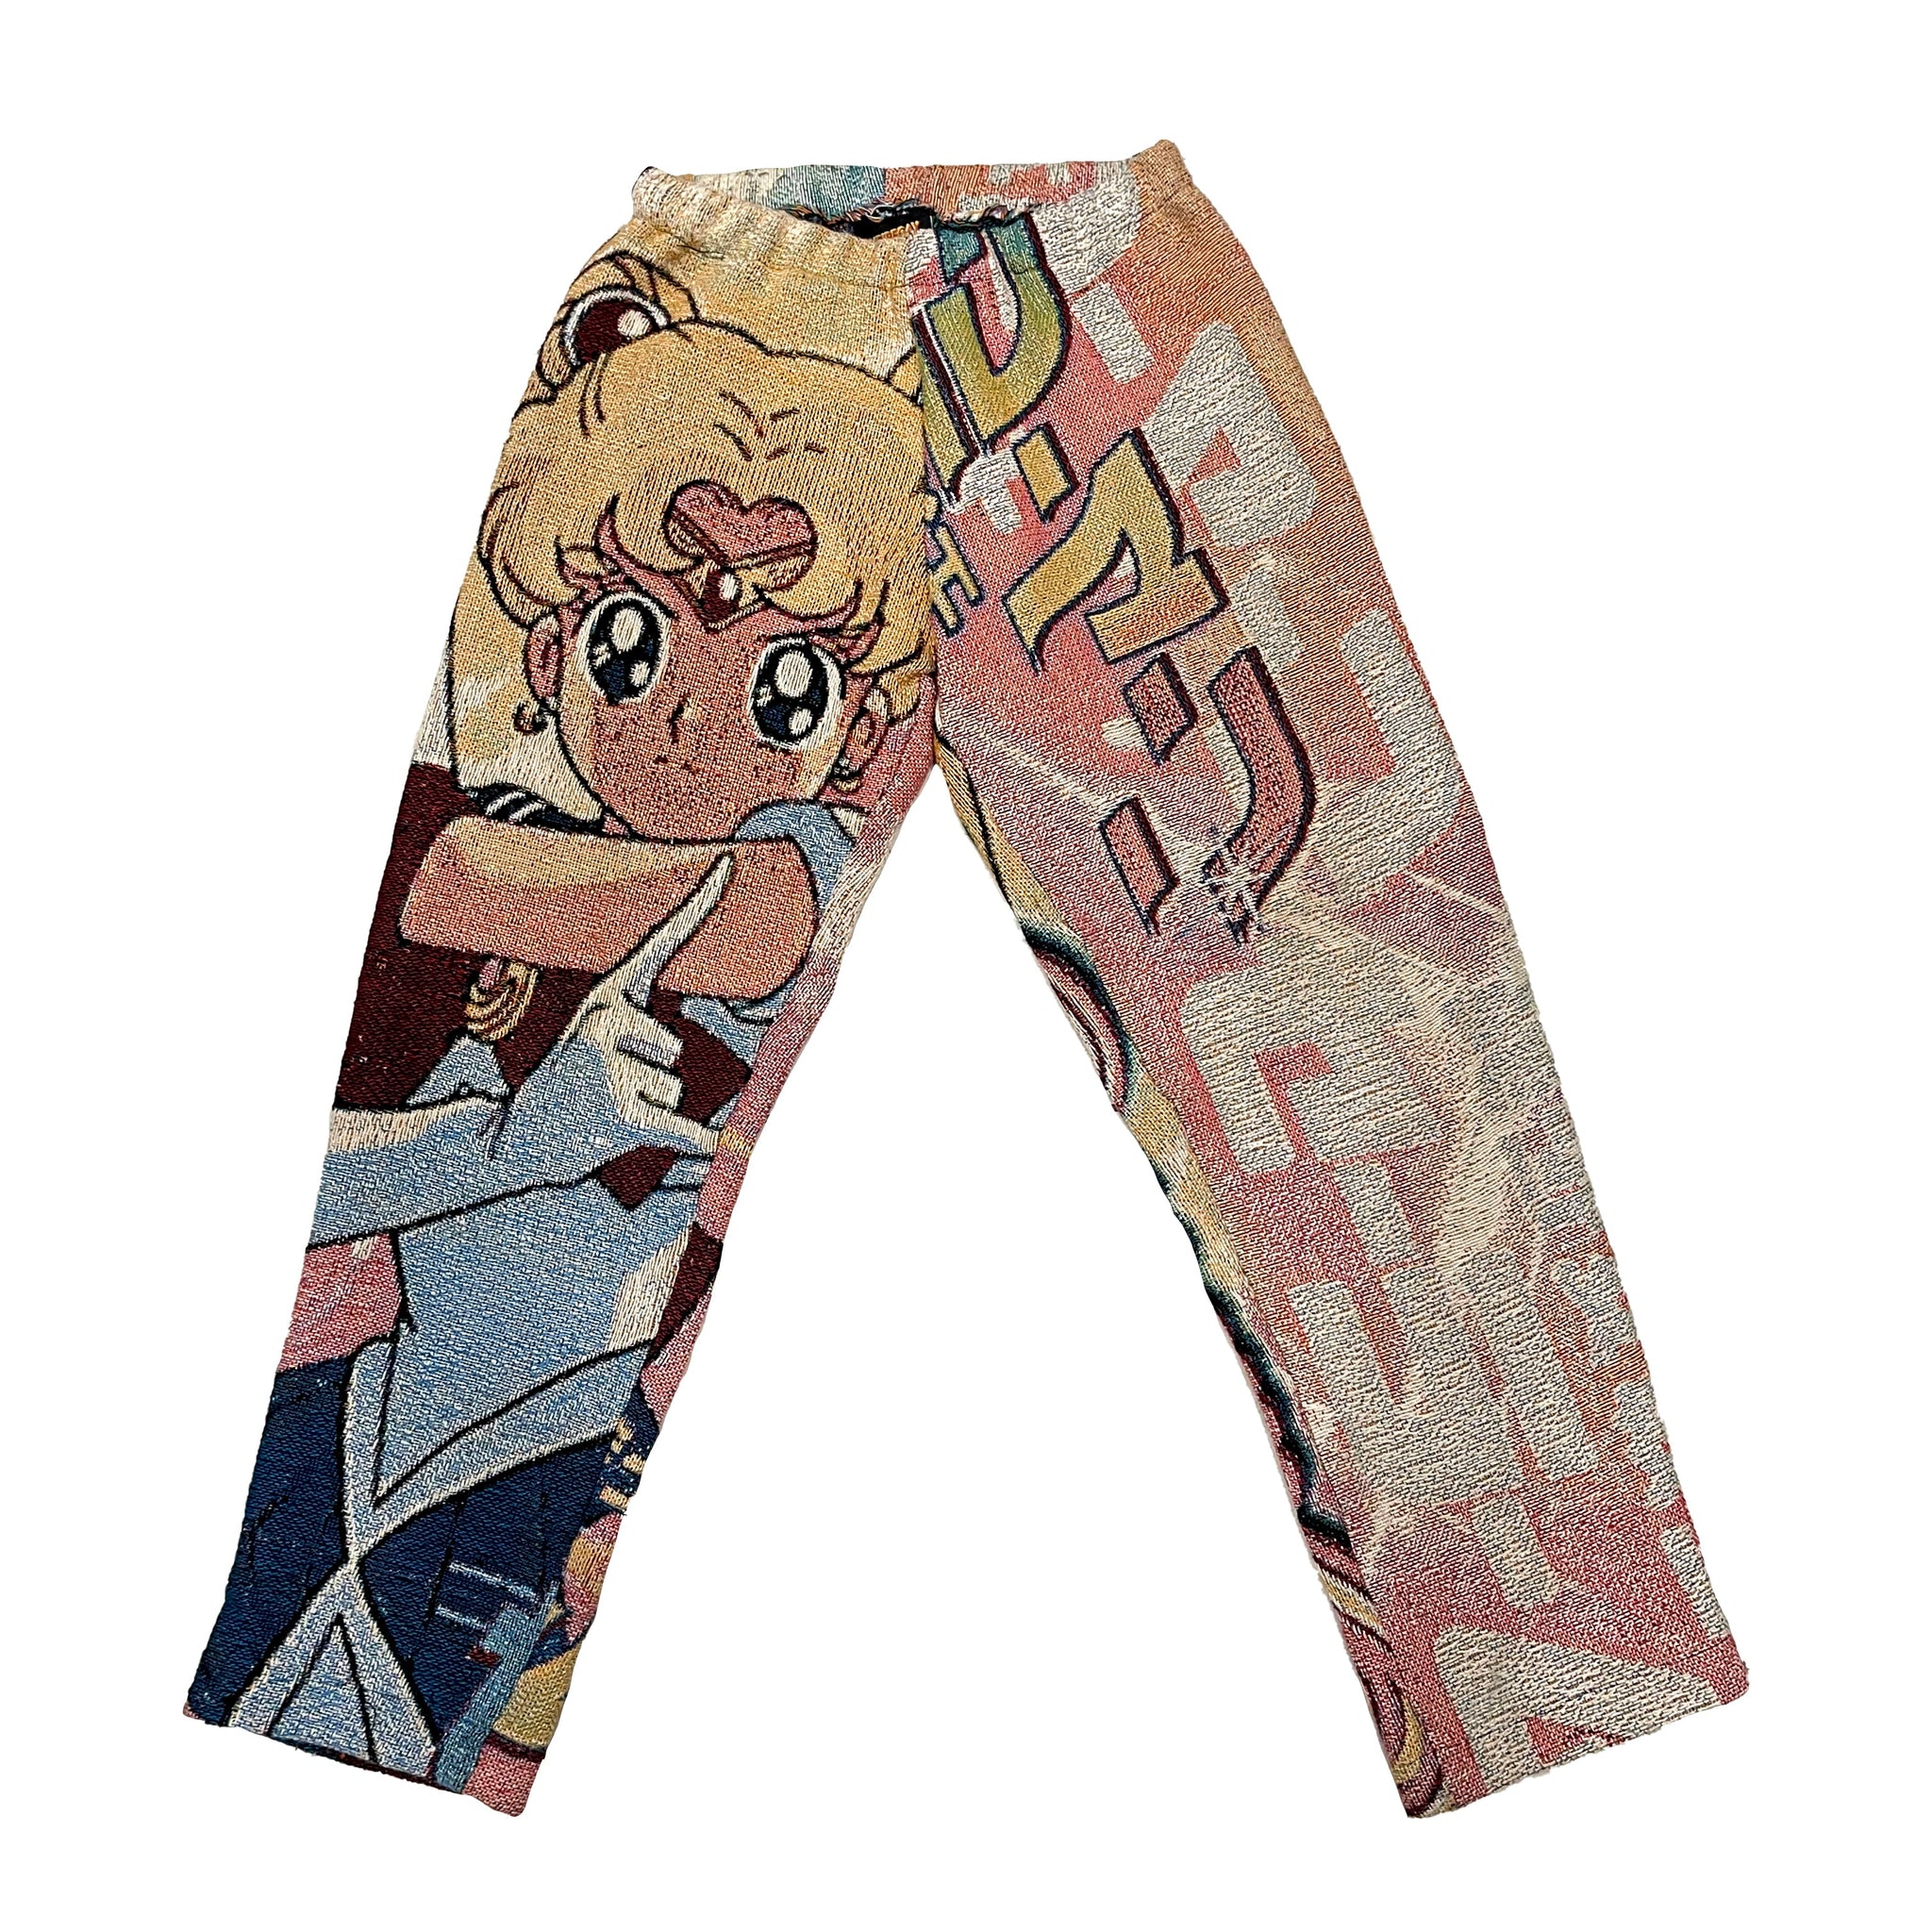 SAILOR MOON WOVEN TAPESTRY PANTS